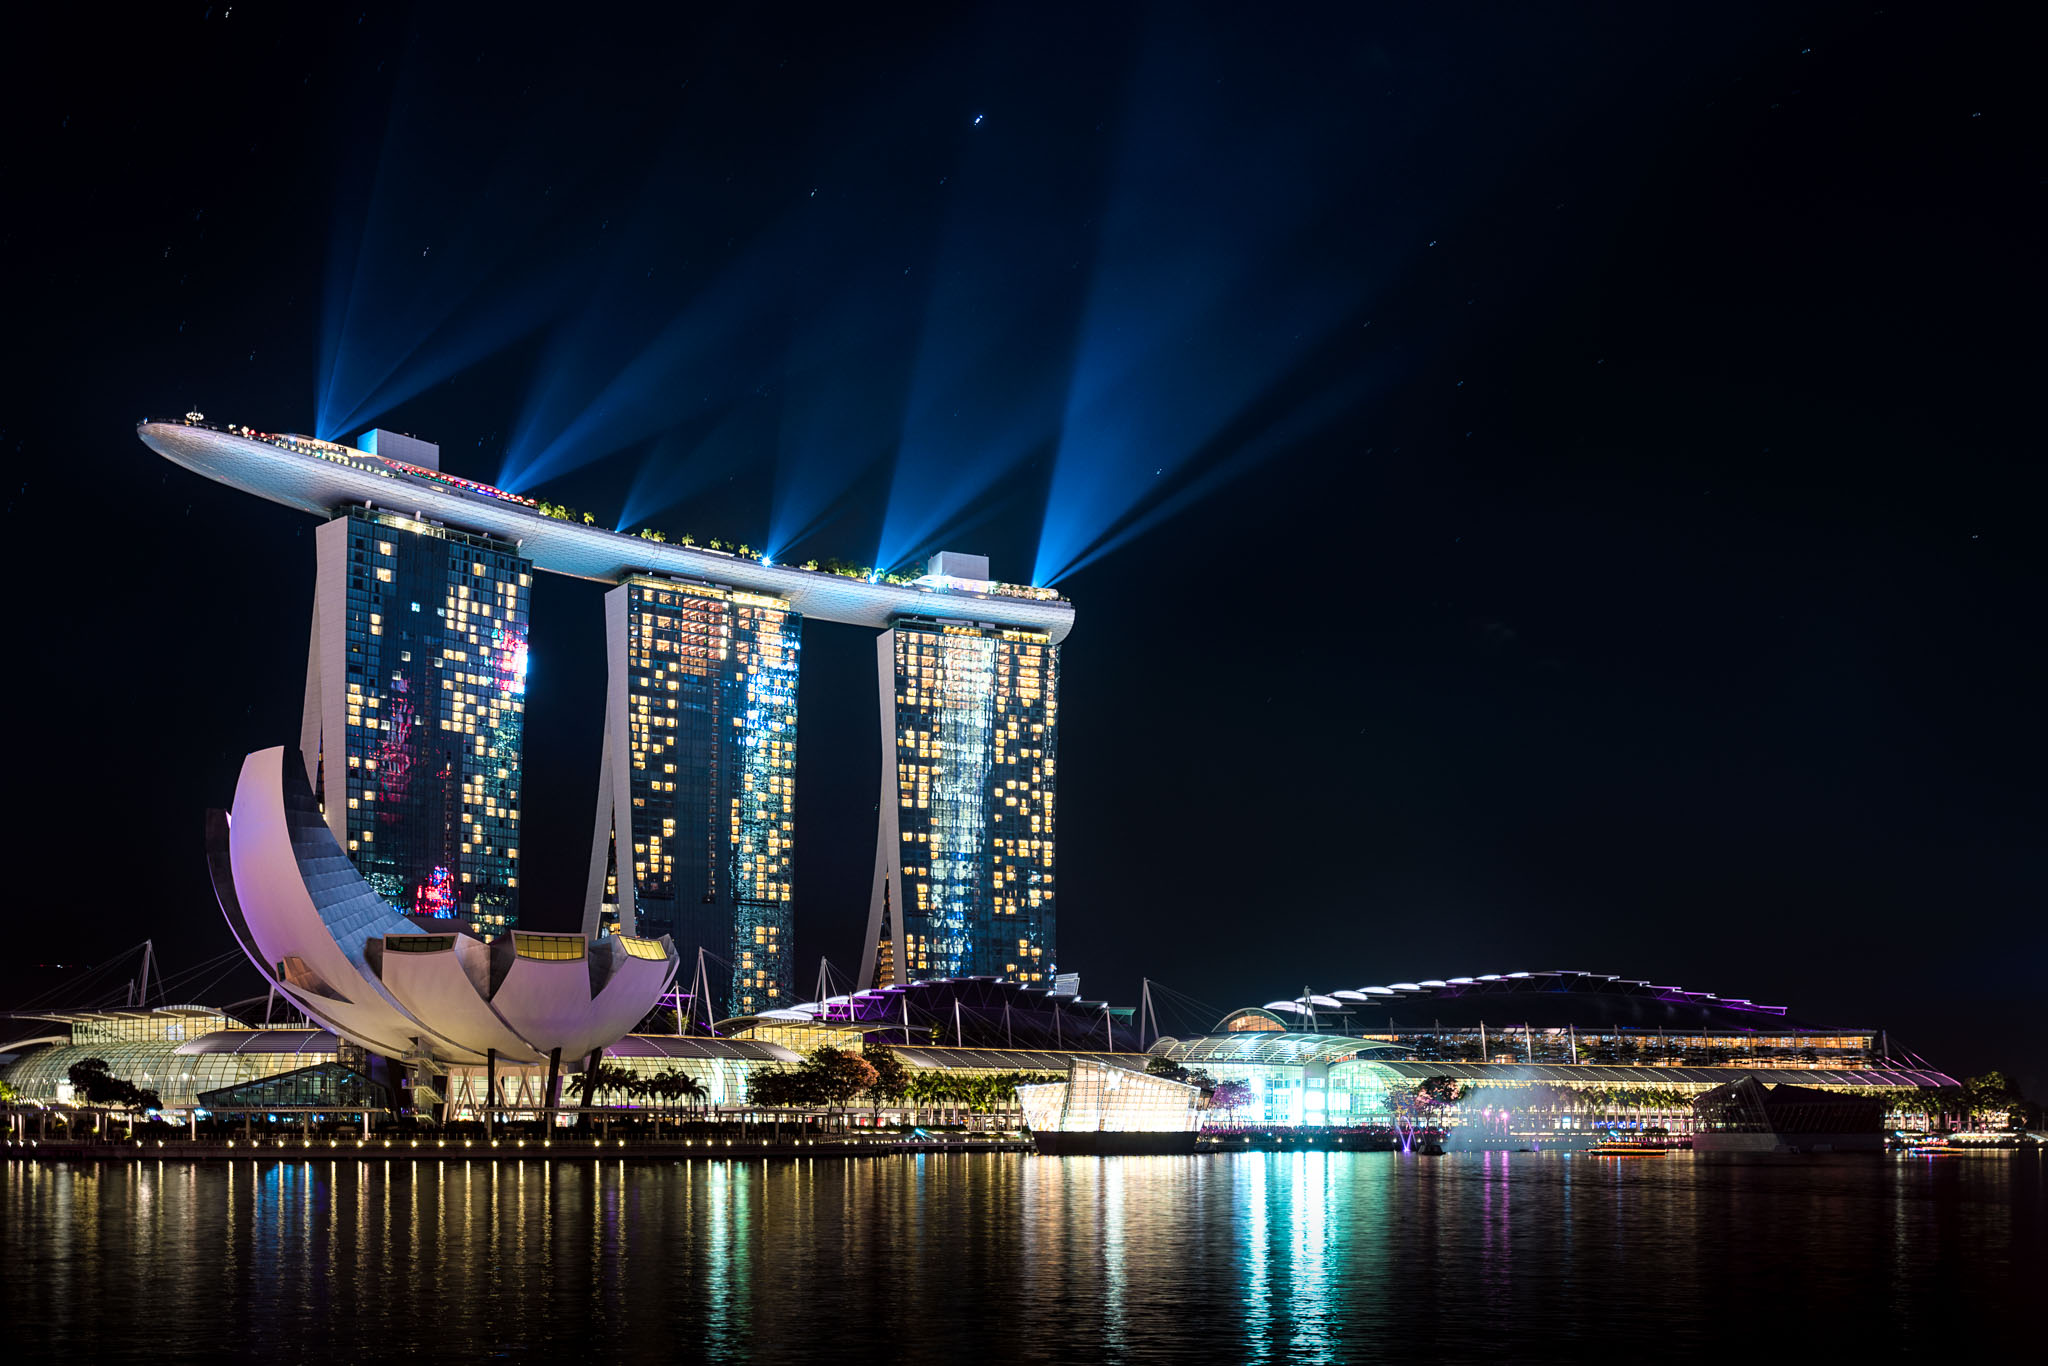 Marina Bay Sands skyline with lights and a body of water